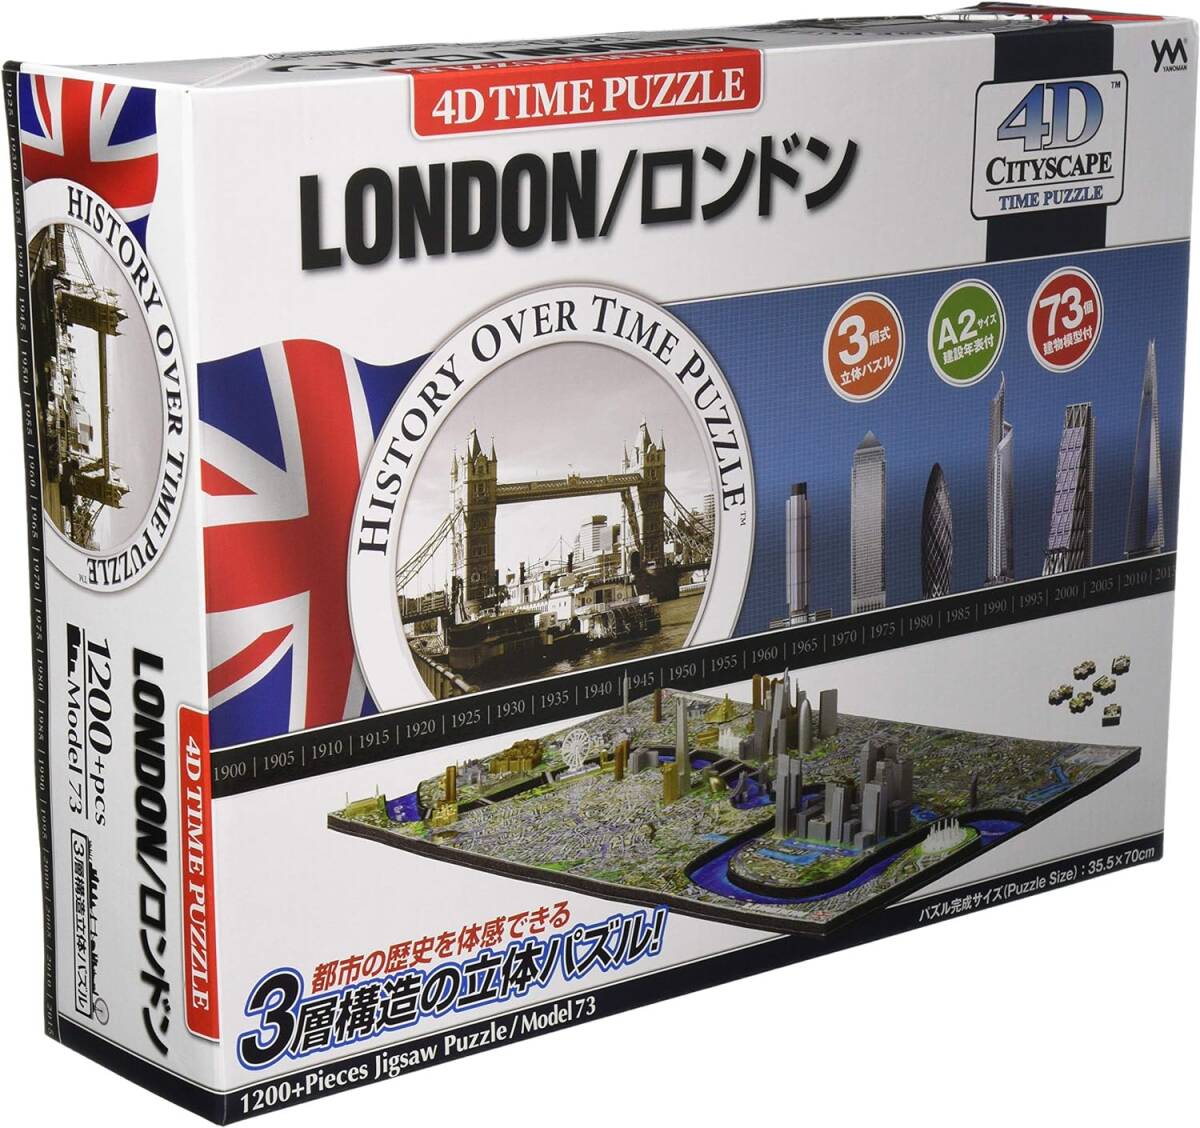 4Dシティスケープ ロンドン タイムパズル 約1200ピース 40012 やのまん　London History Time 4D Cityscape Puzzle: This puzzle_画像1